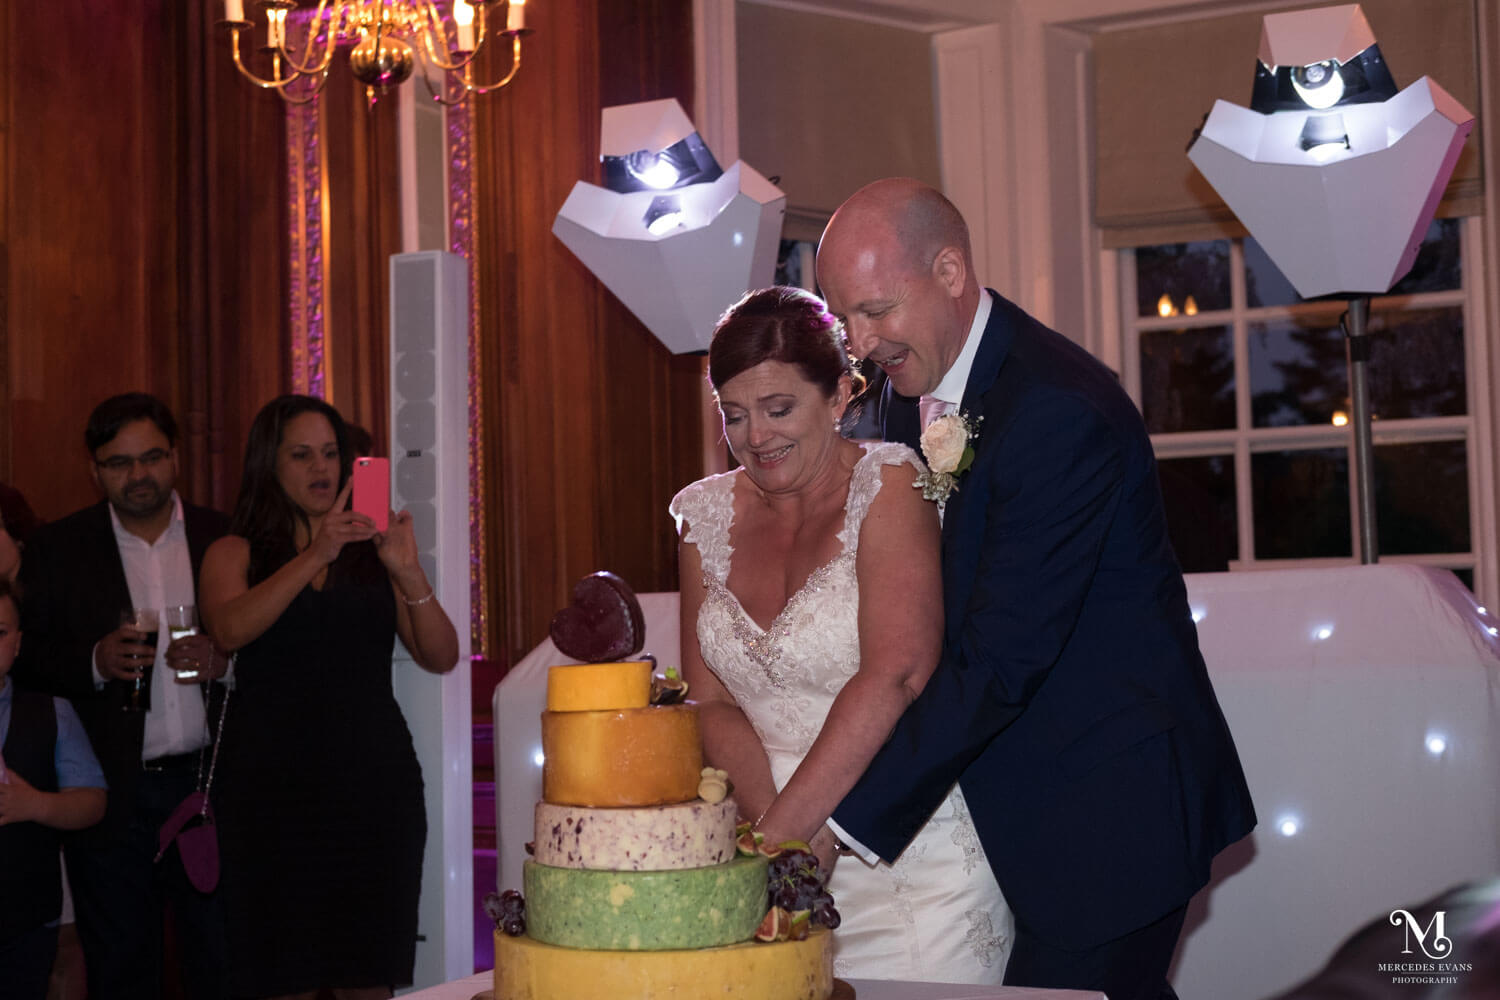 the bride and groom try to cut the cheese tower, watched by guests